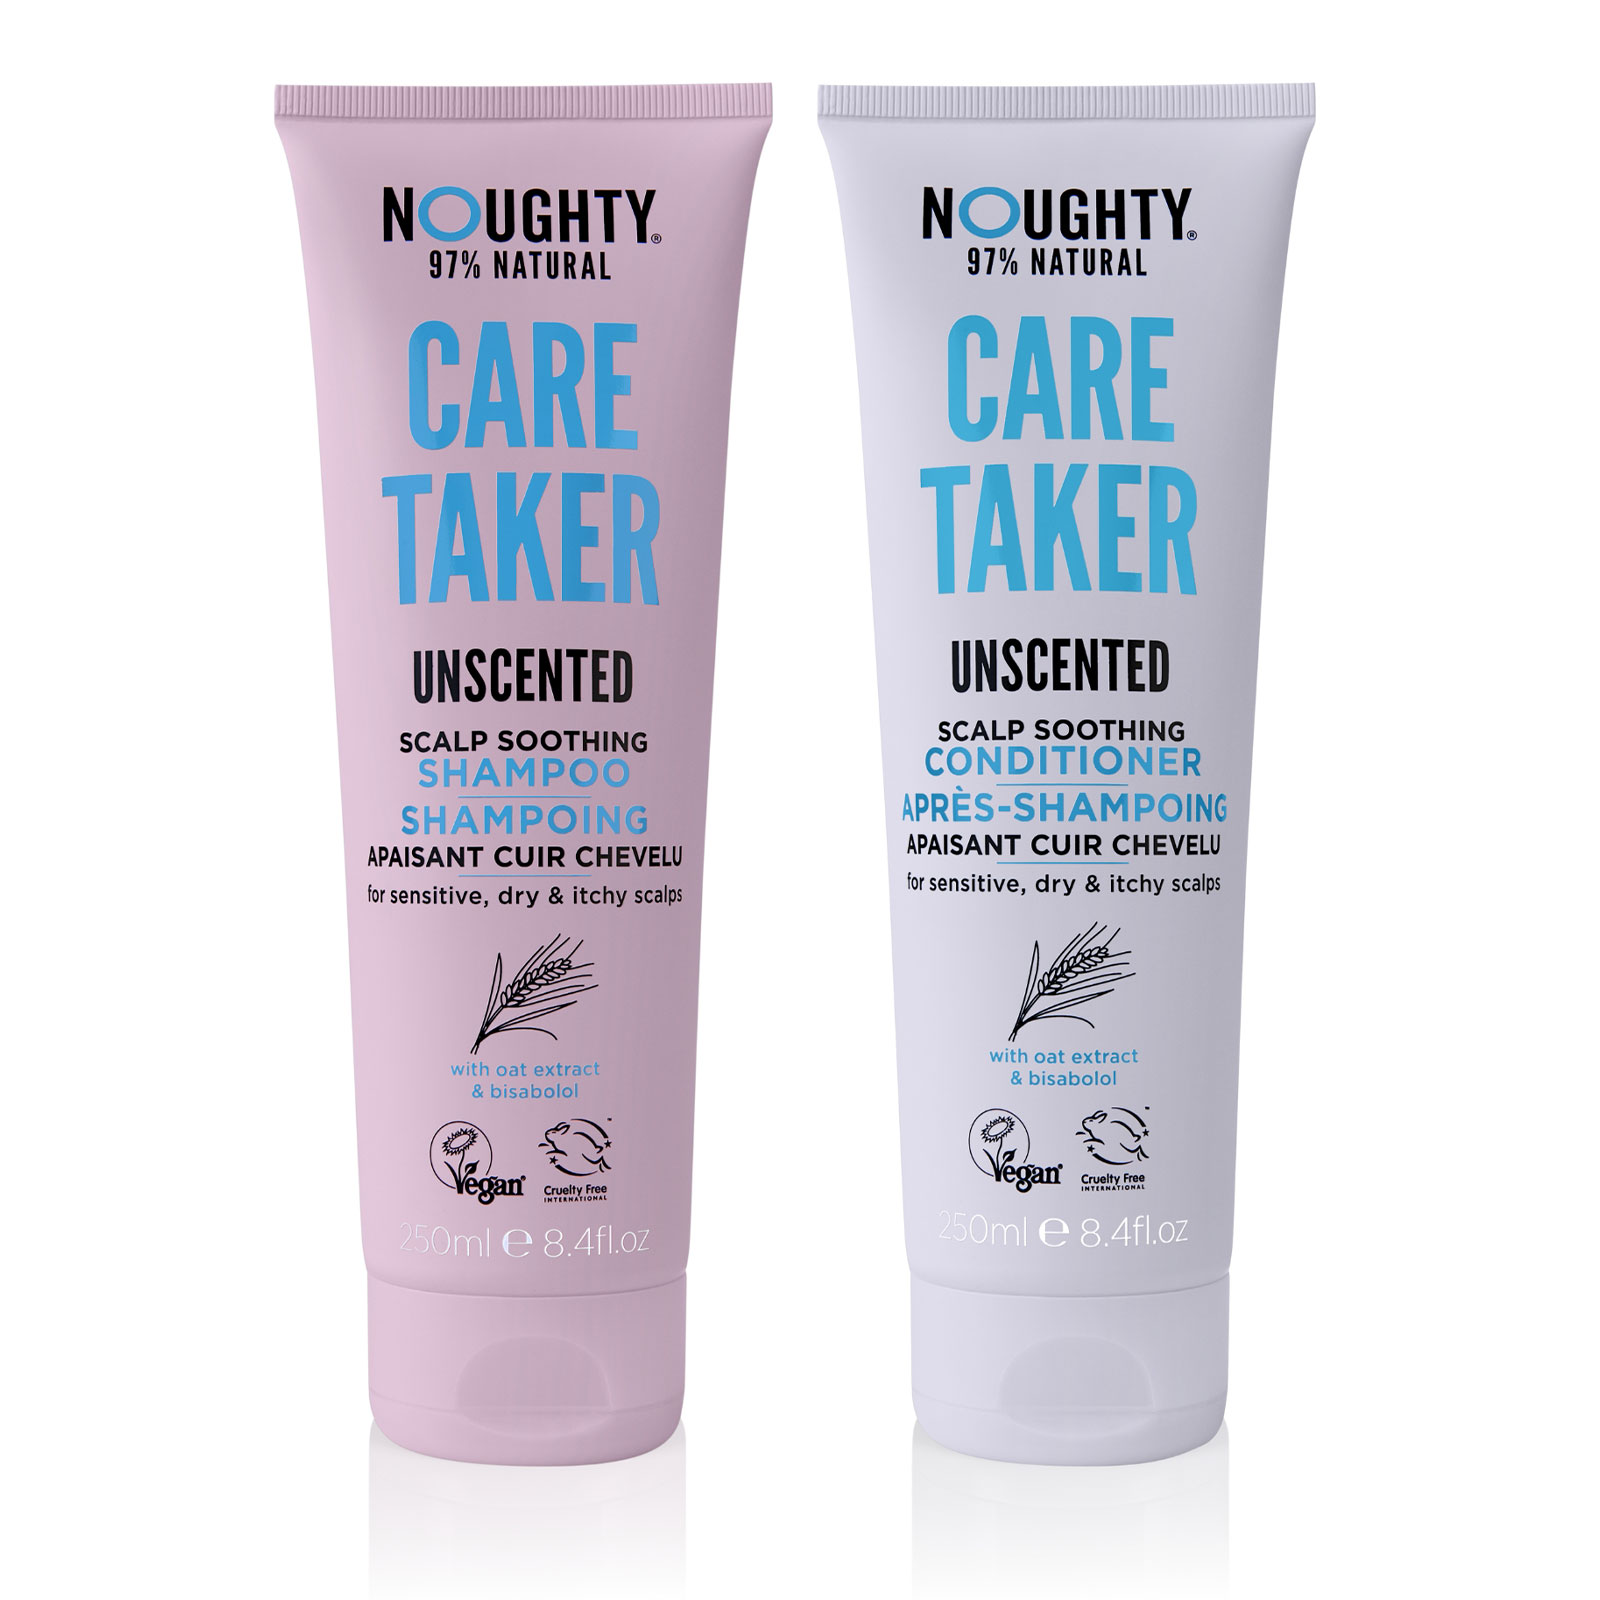 Noughty Care Taker Shampoo & Conditioner Duo